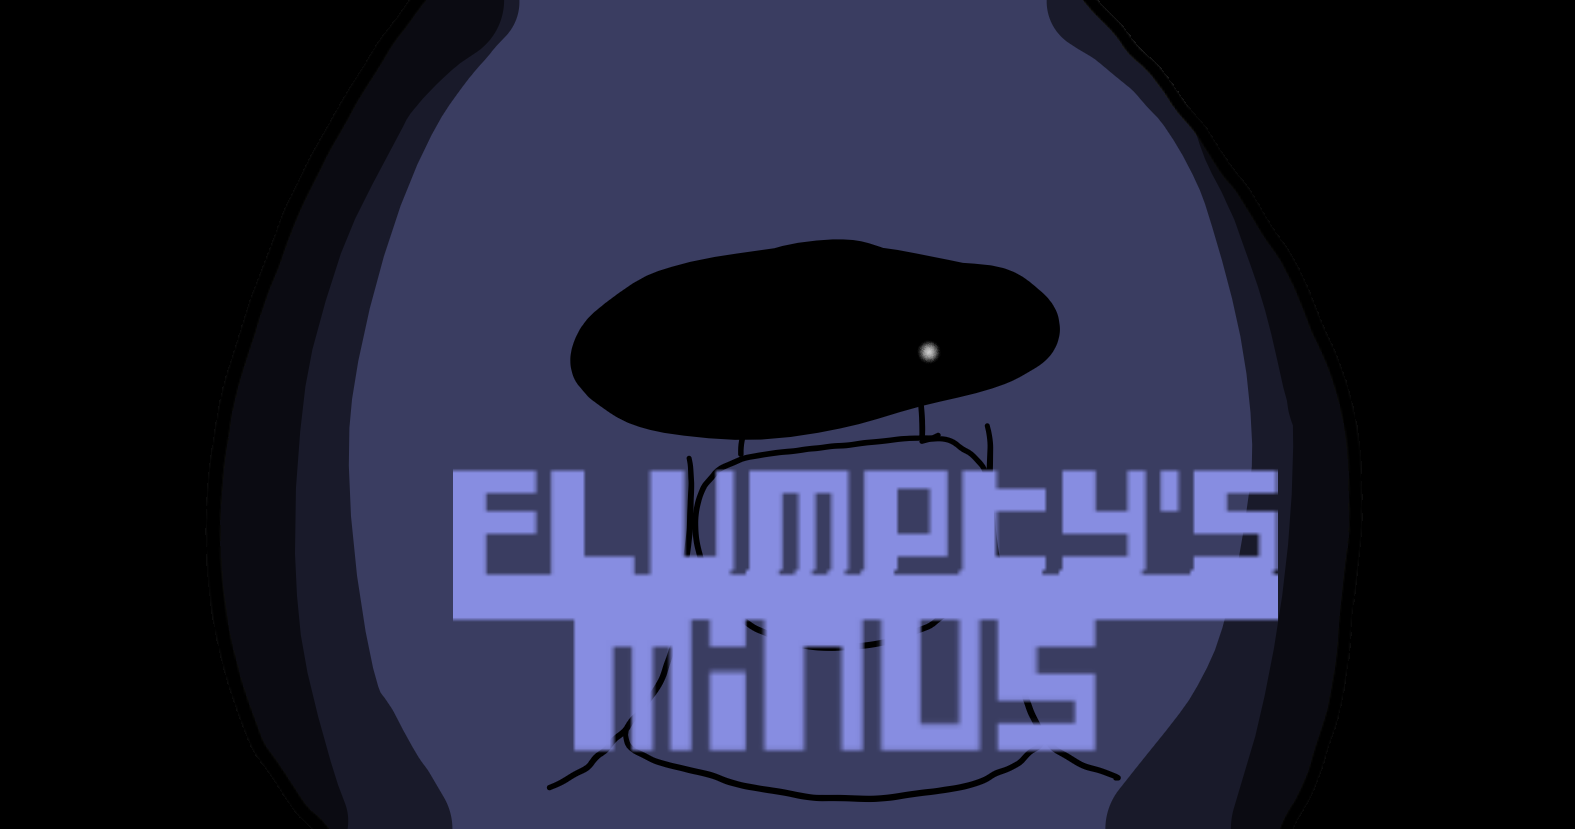 Five Nights with Flumpty's, One Night at Flumpty's Fangames Wiki